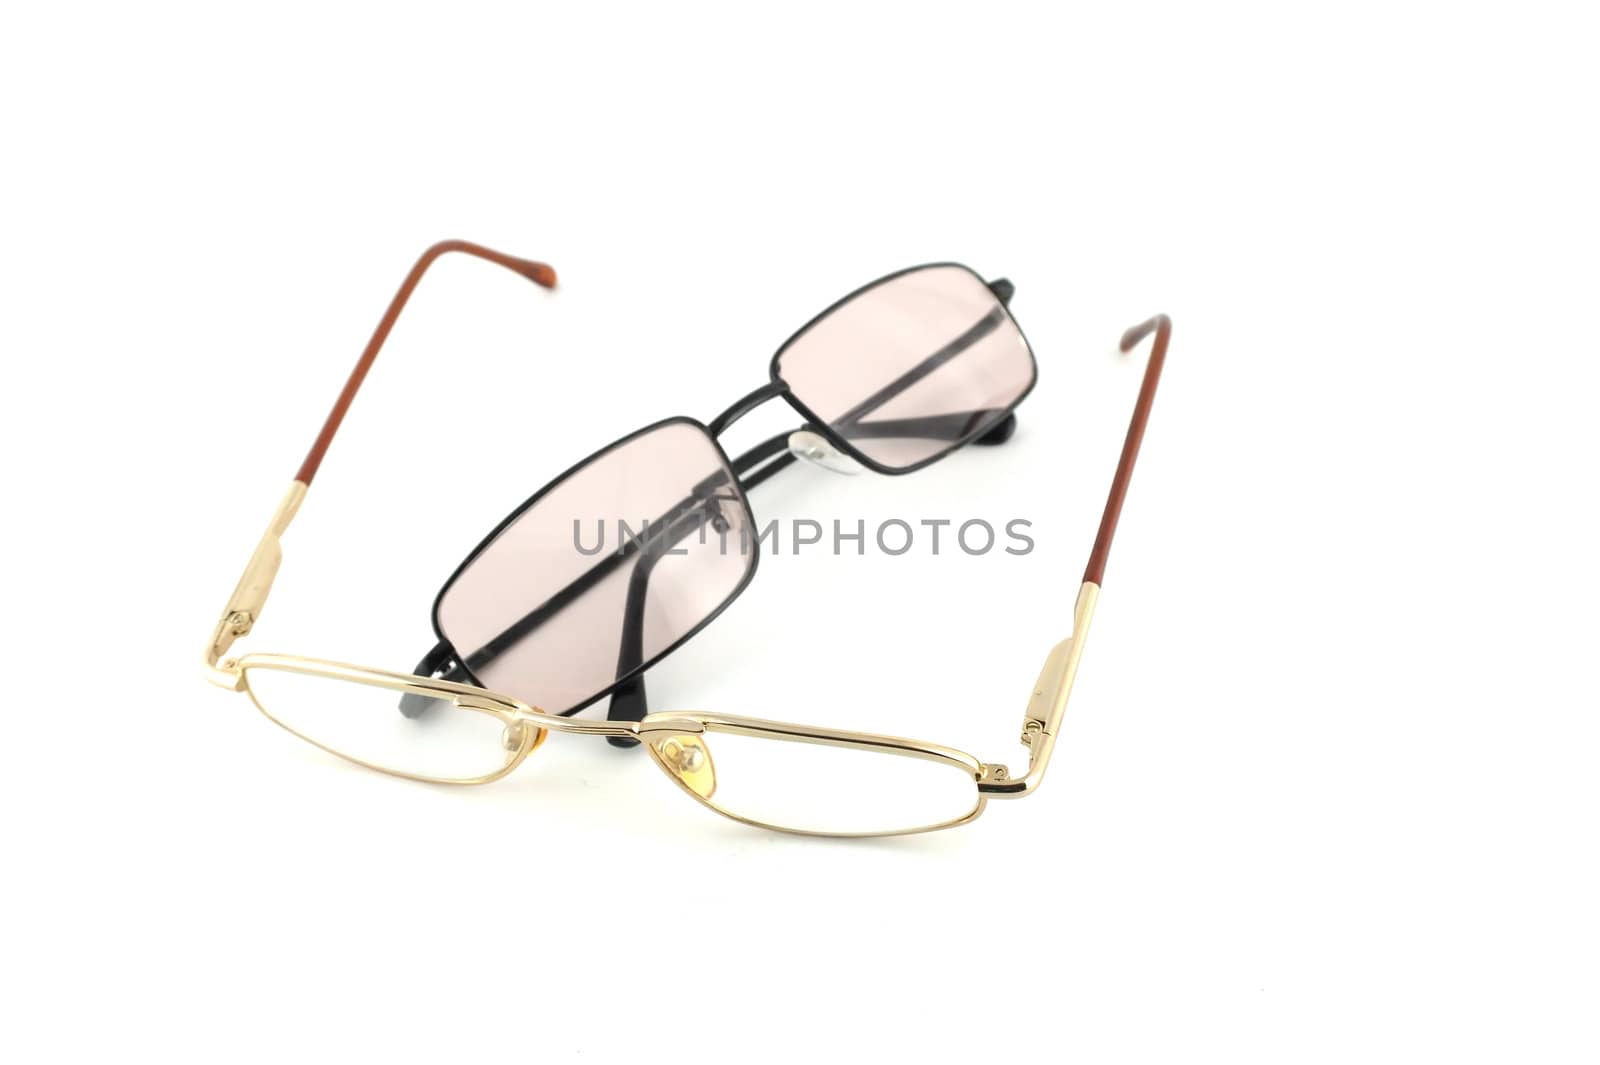 Two optical glasses over white